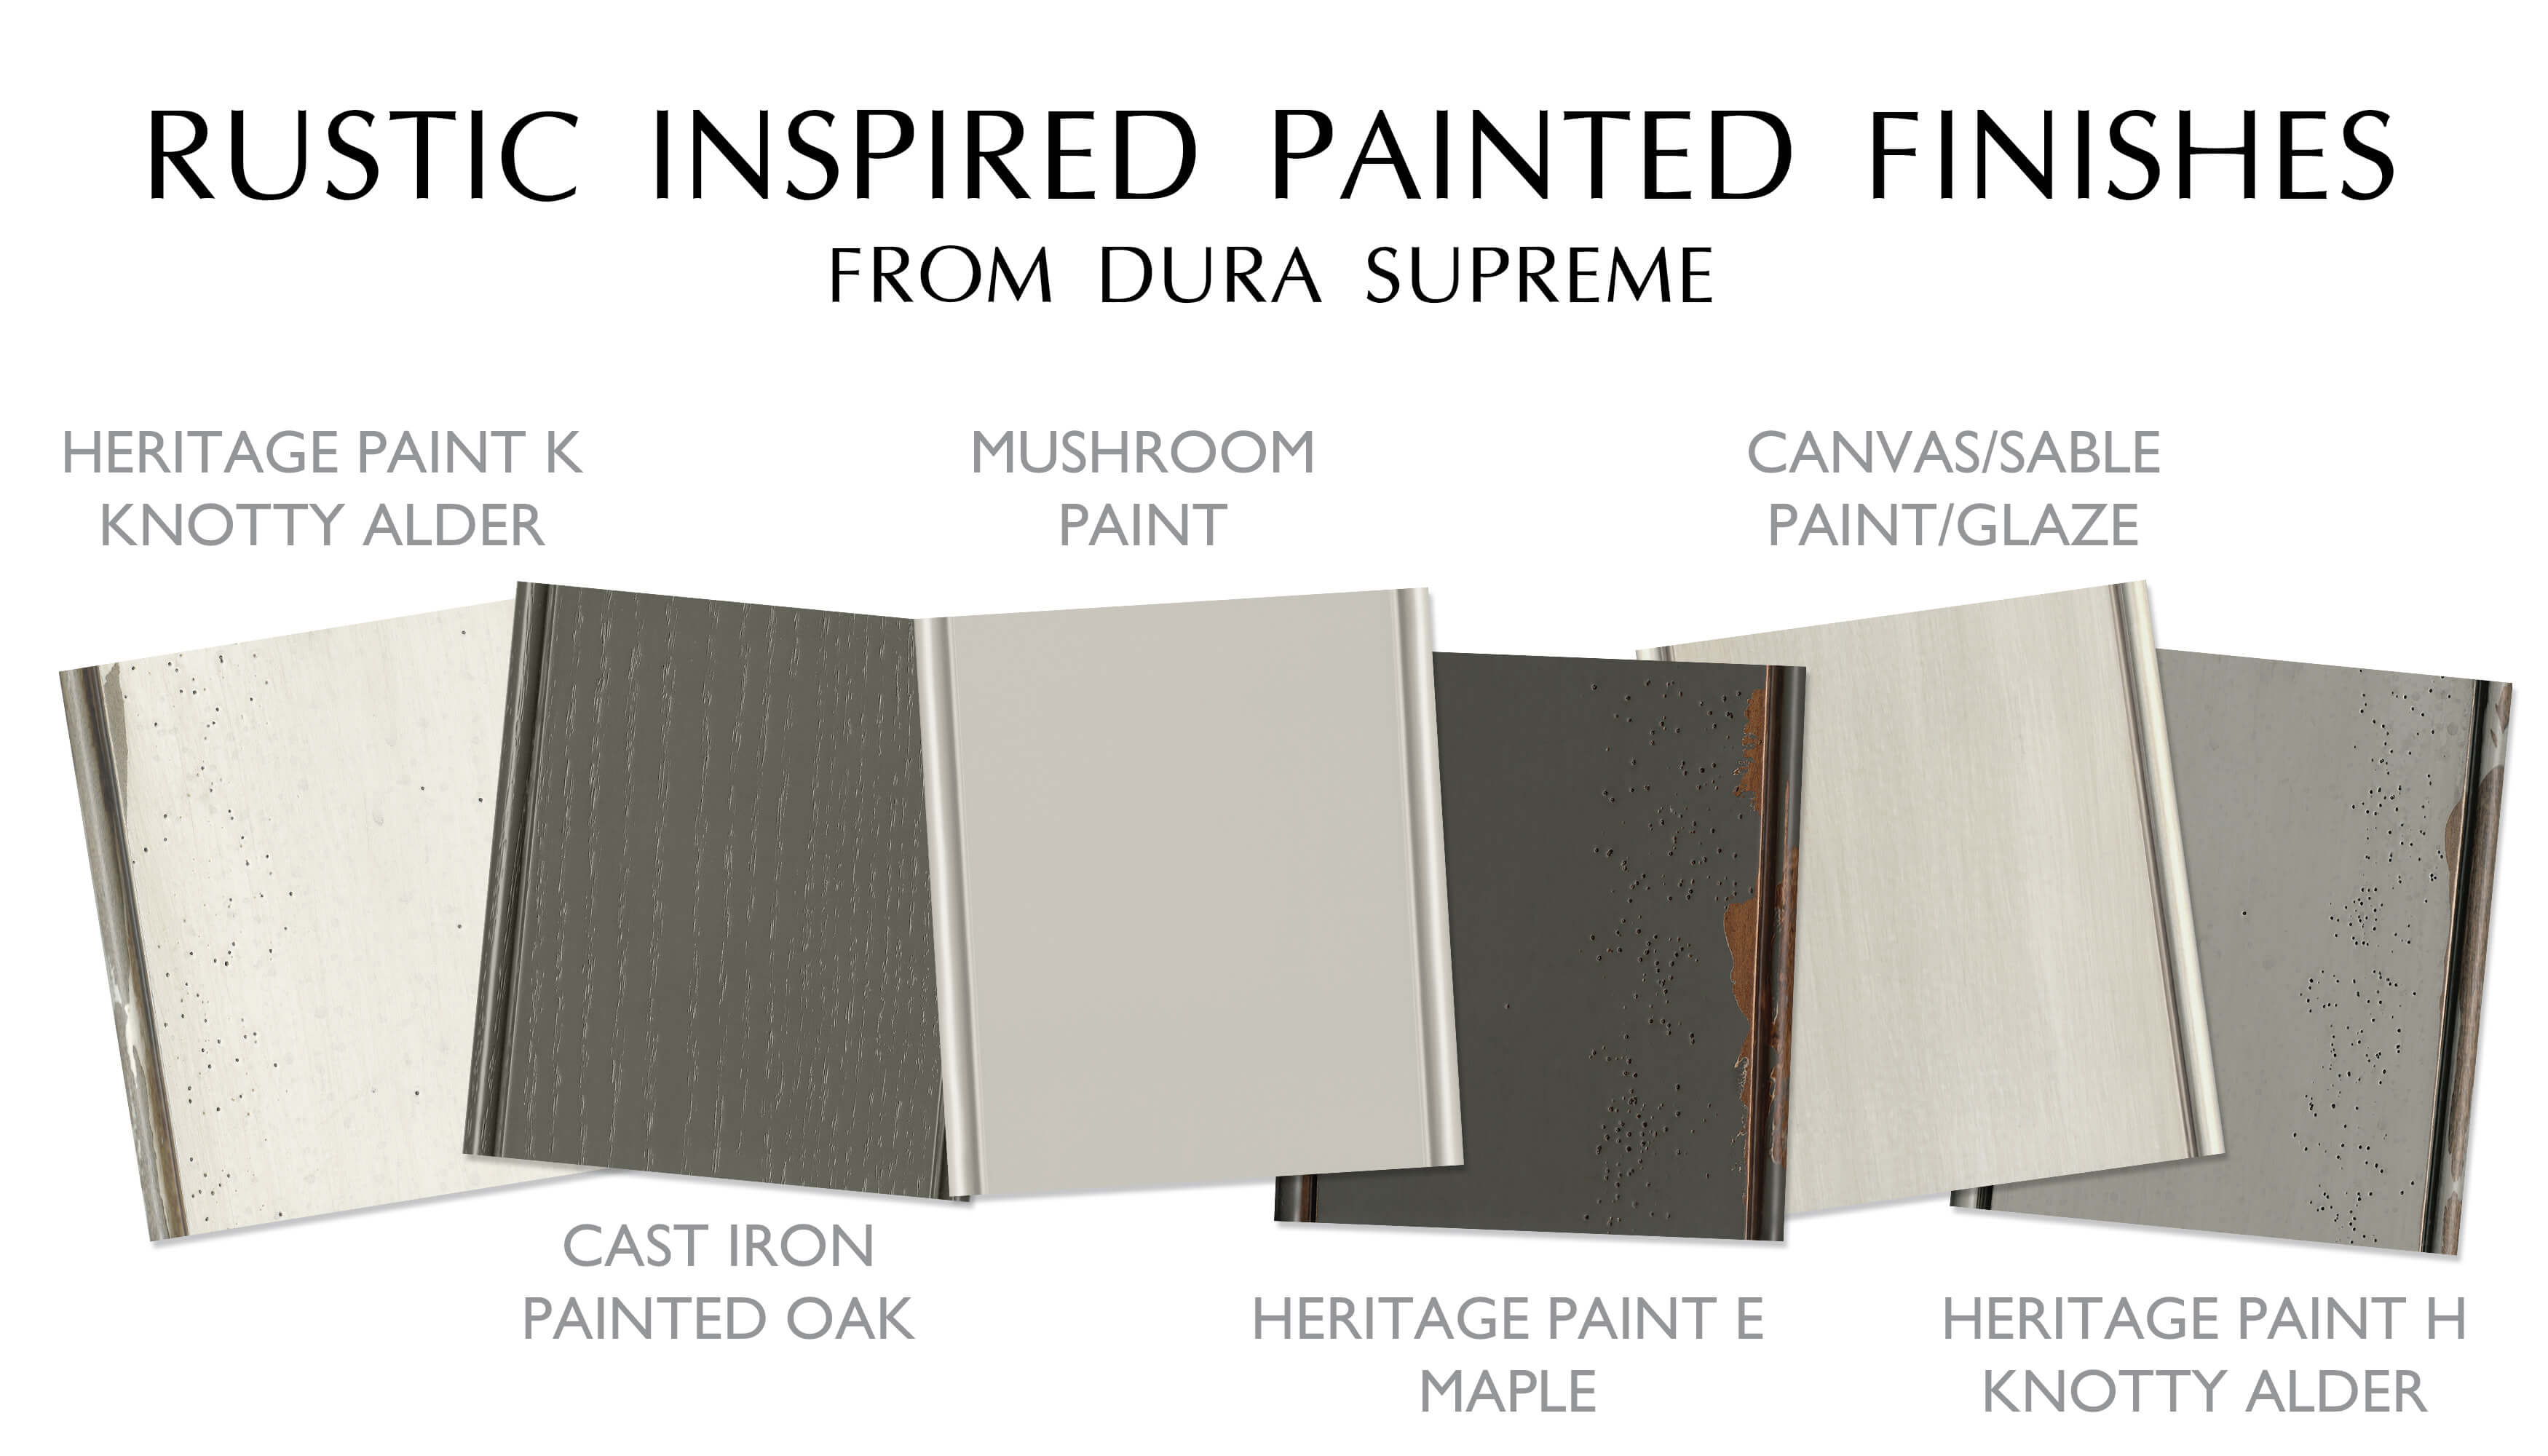 Rustic Style cabinetry paint colors and distressed or aged finish options from Dura Supreme Cabinetry.